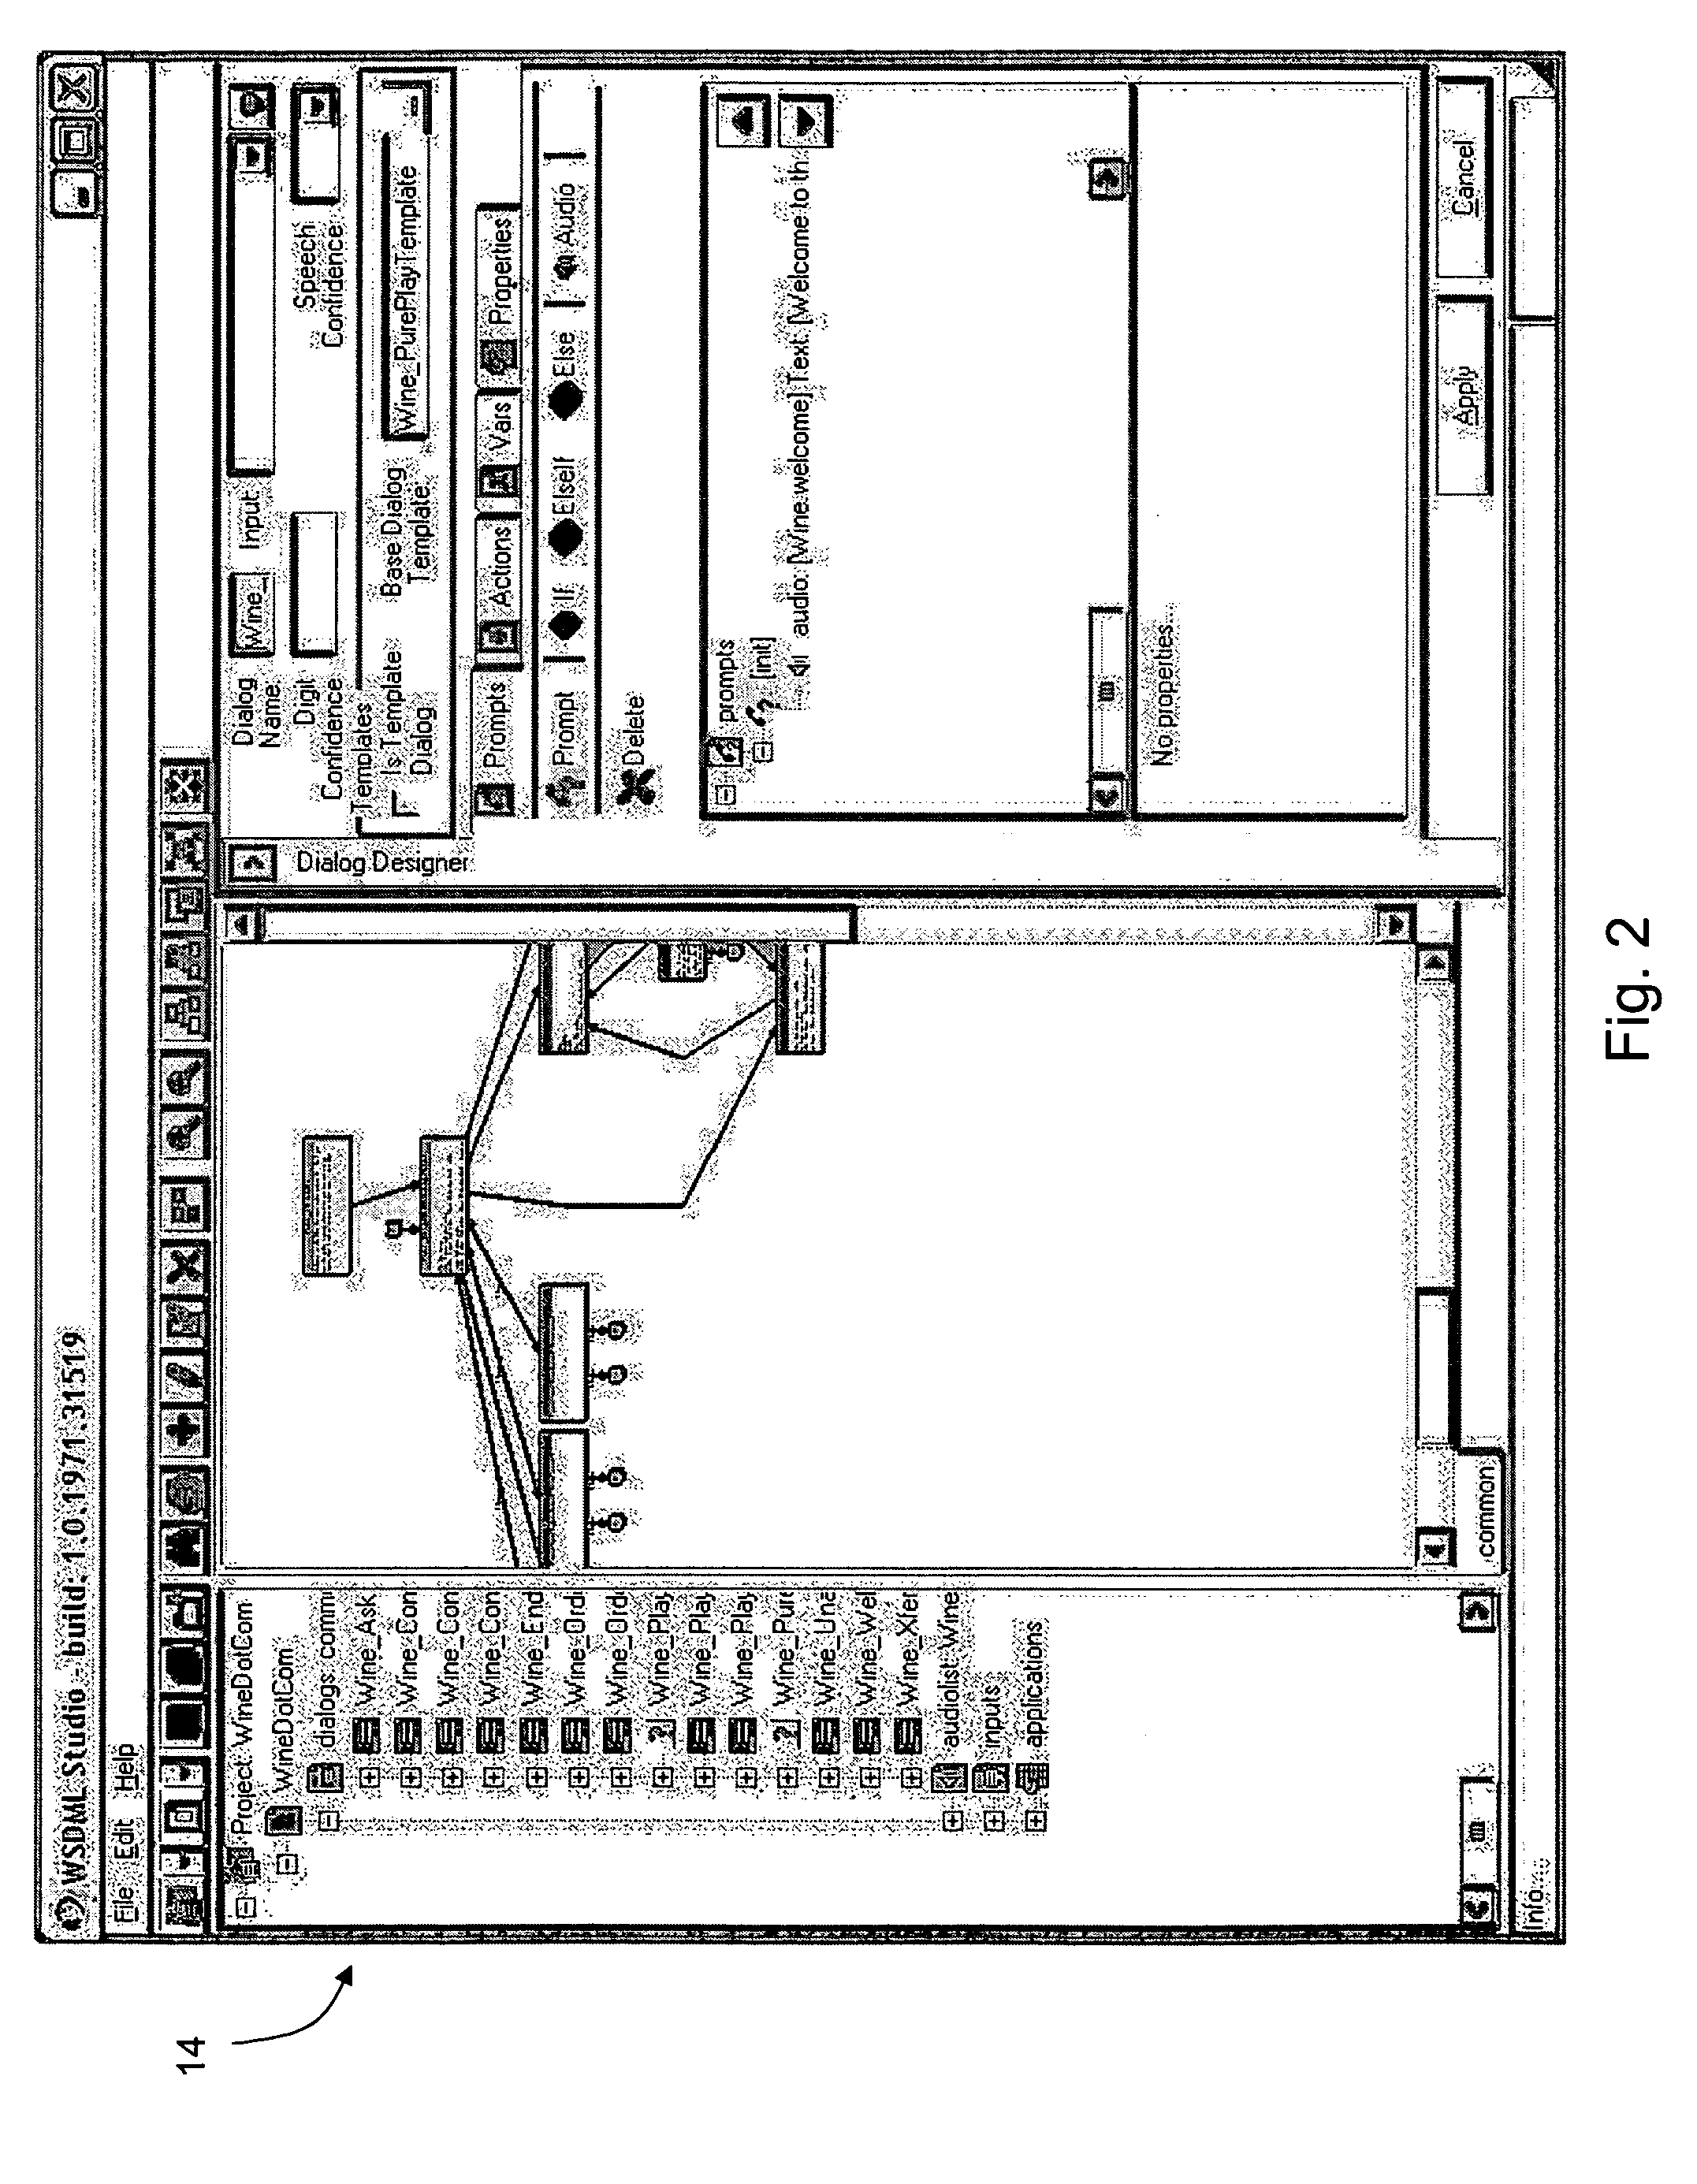 Methods and systems for developing and testing speech applications